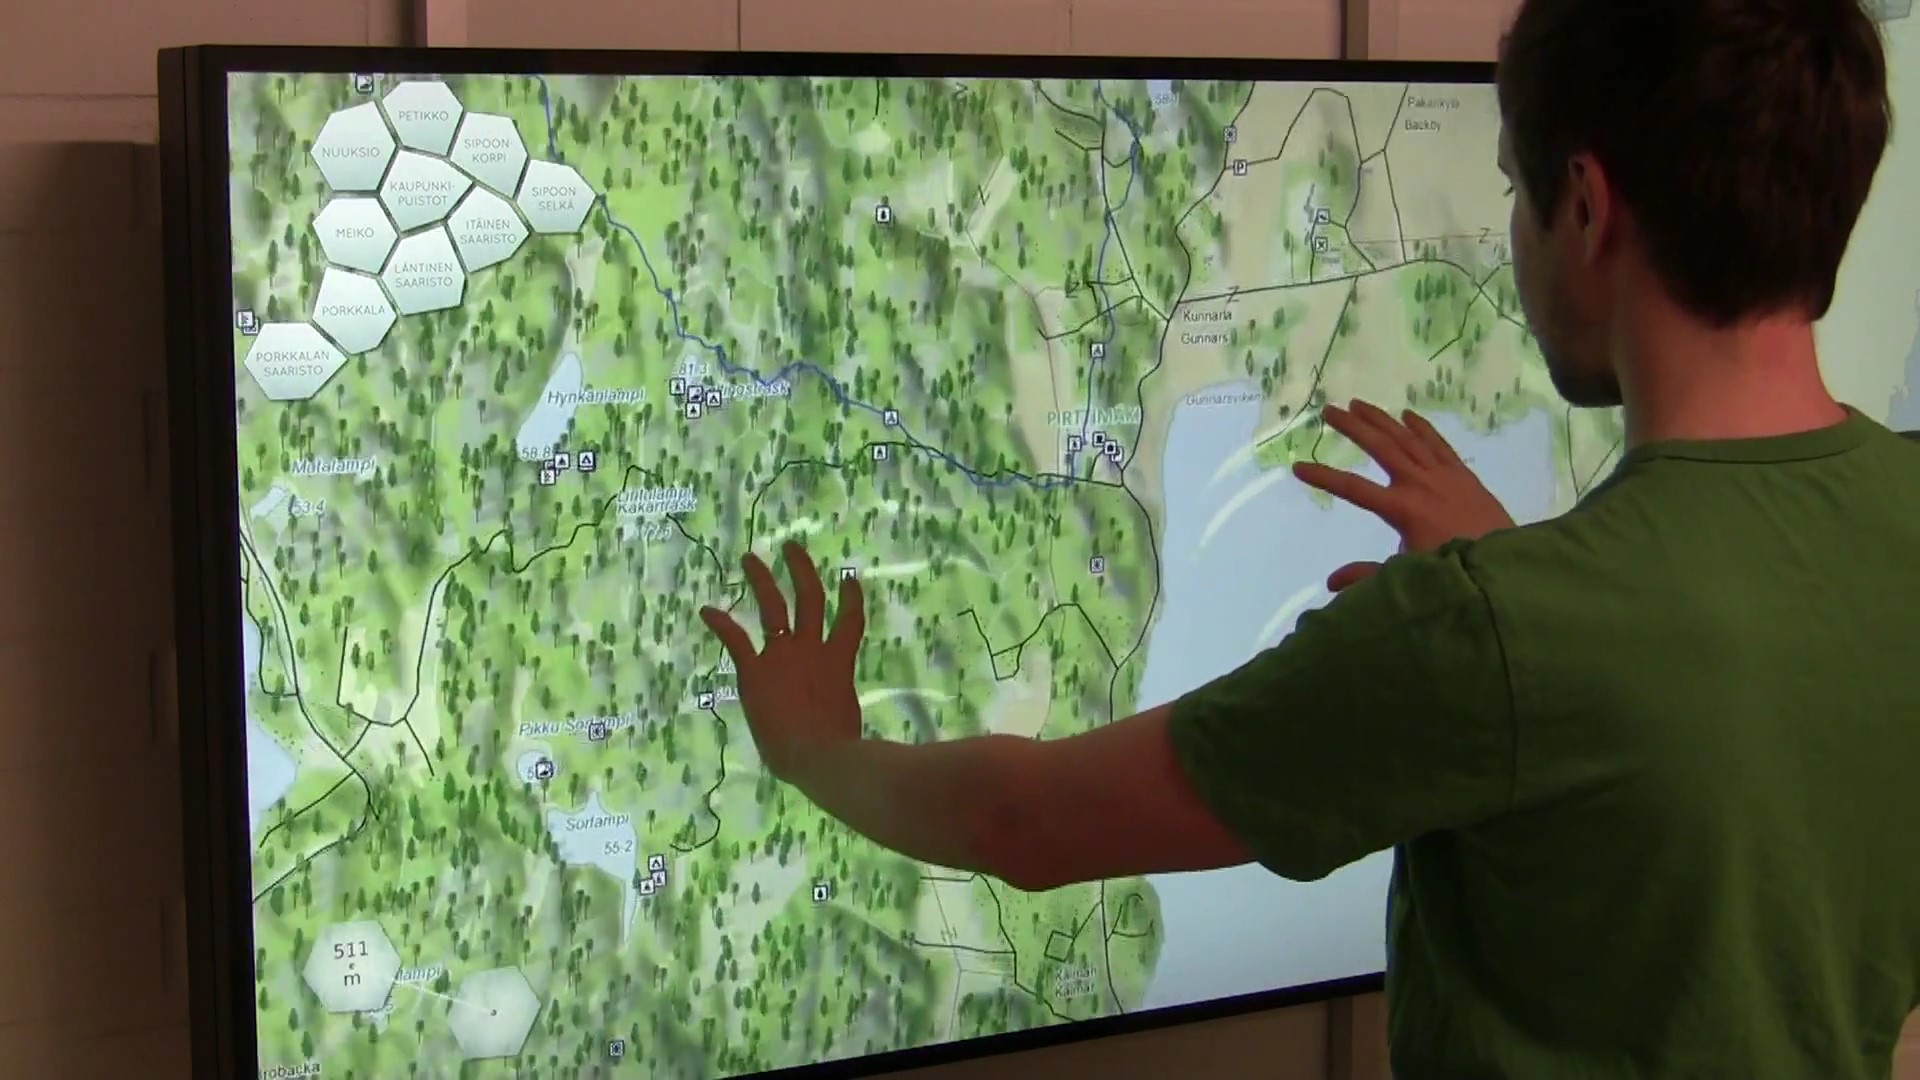 A person wieving a touch screen map.